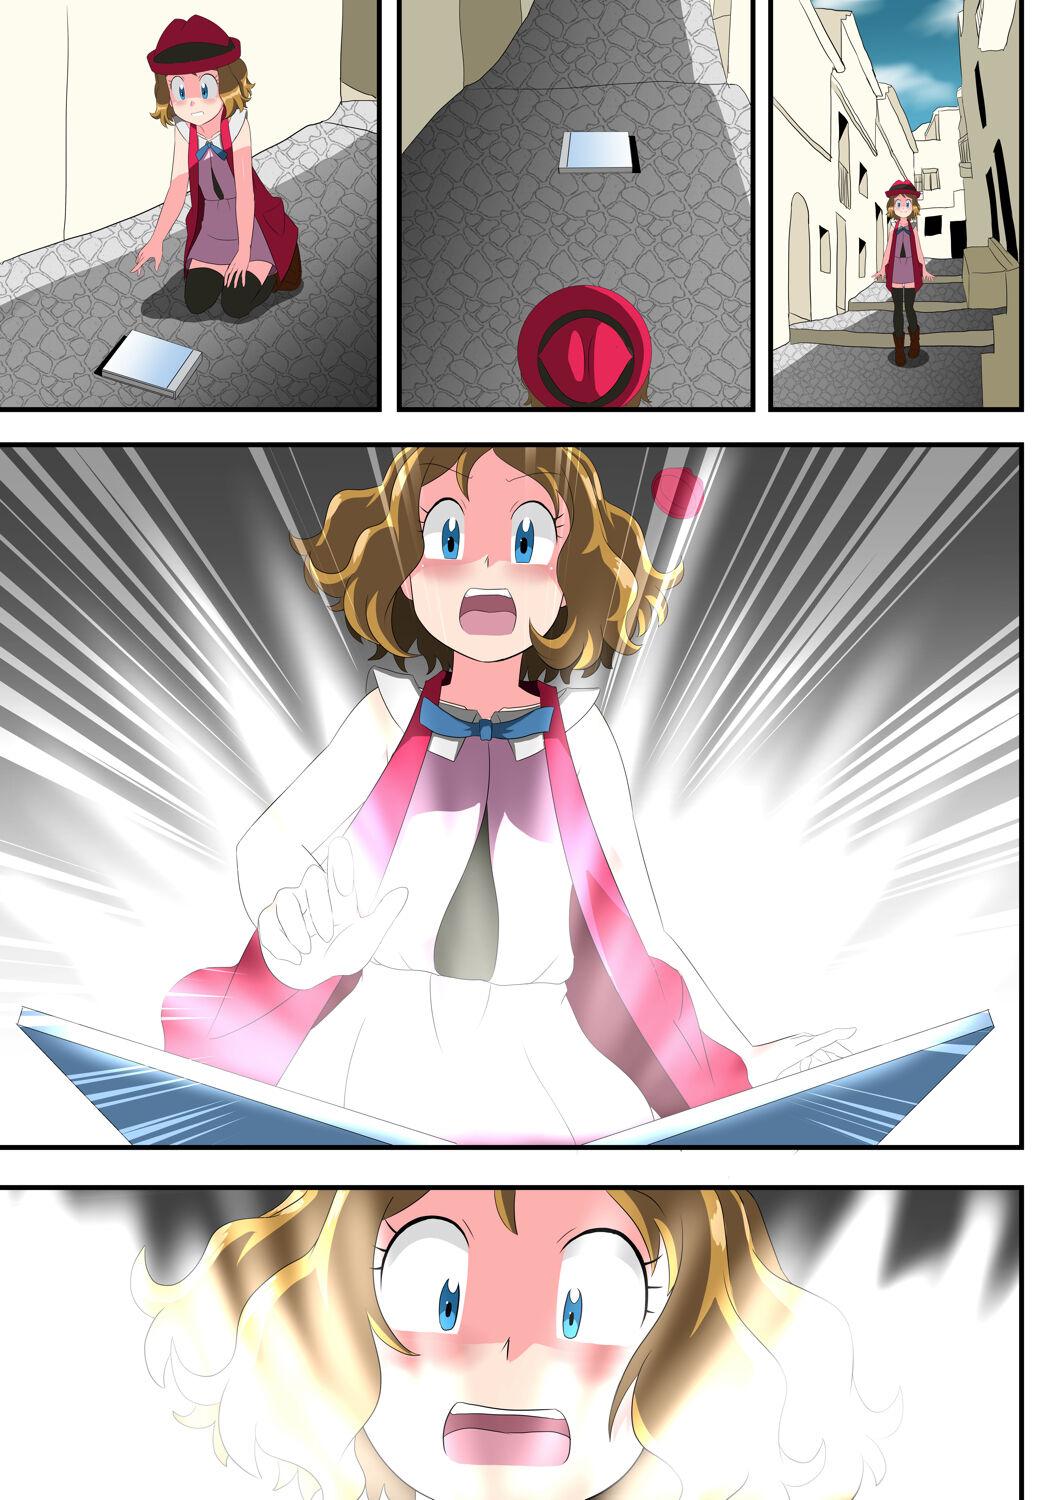 Fucking shinenkan モンスターと思われて捕獲されちゃった！They thought I was a pokemon and captured me ! - Pokemon | pocket monsters Stripping - Page 11